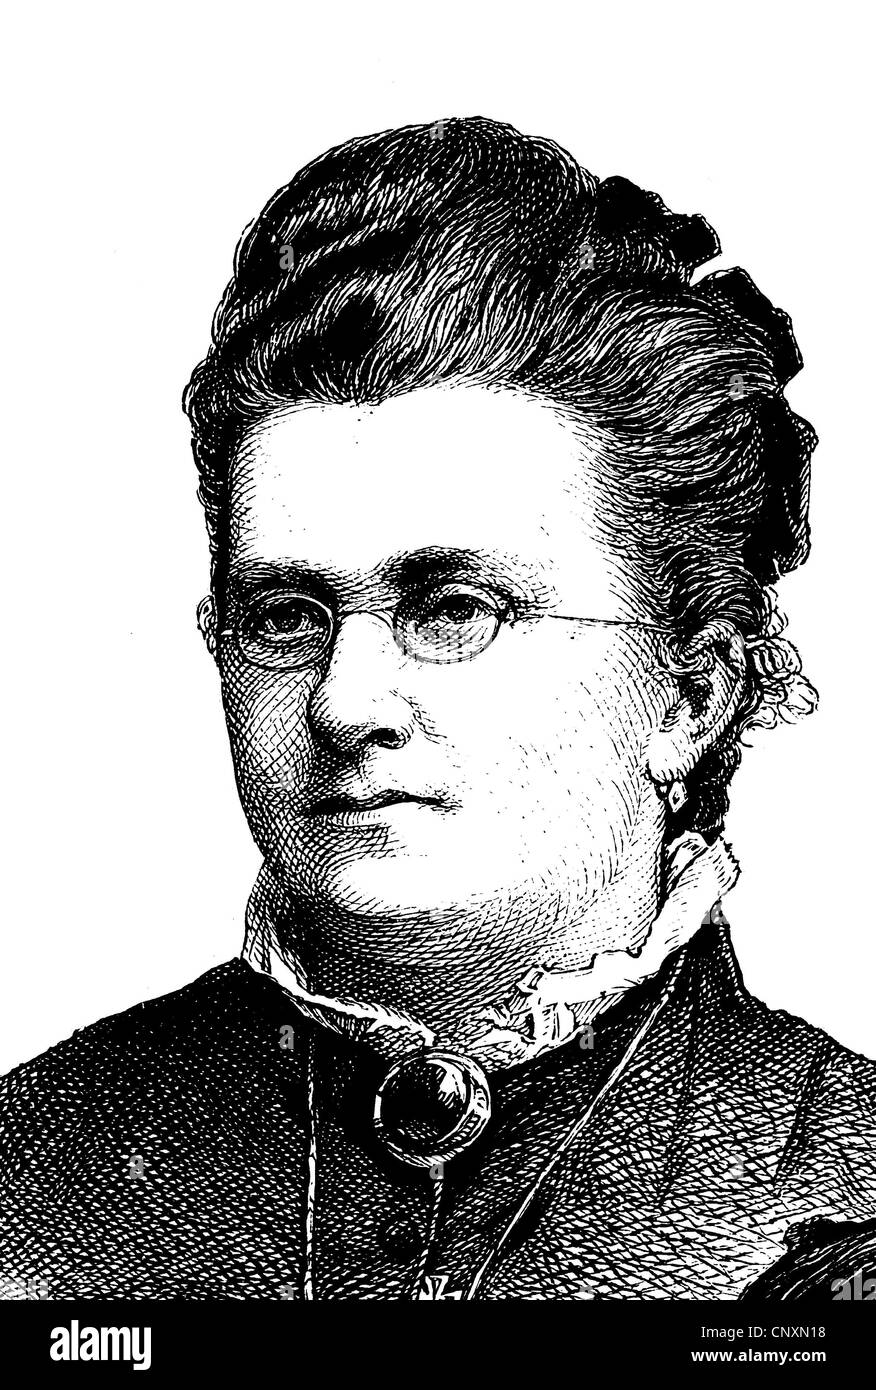 Lina Morgenstern, 1830 - 1909, a German writer, feminist and social activist, historic engraving, 1883 Stock Photo